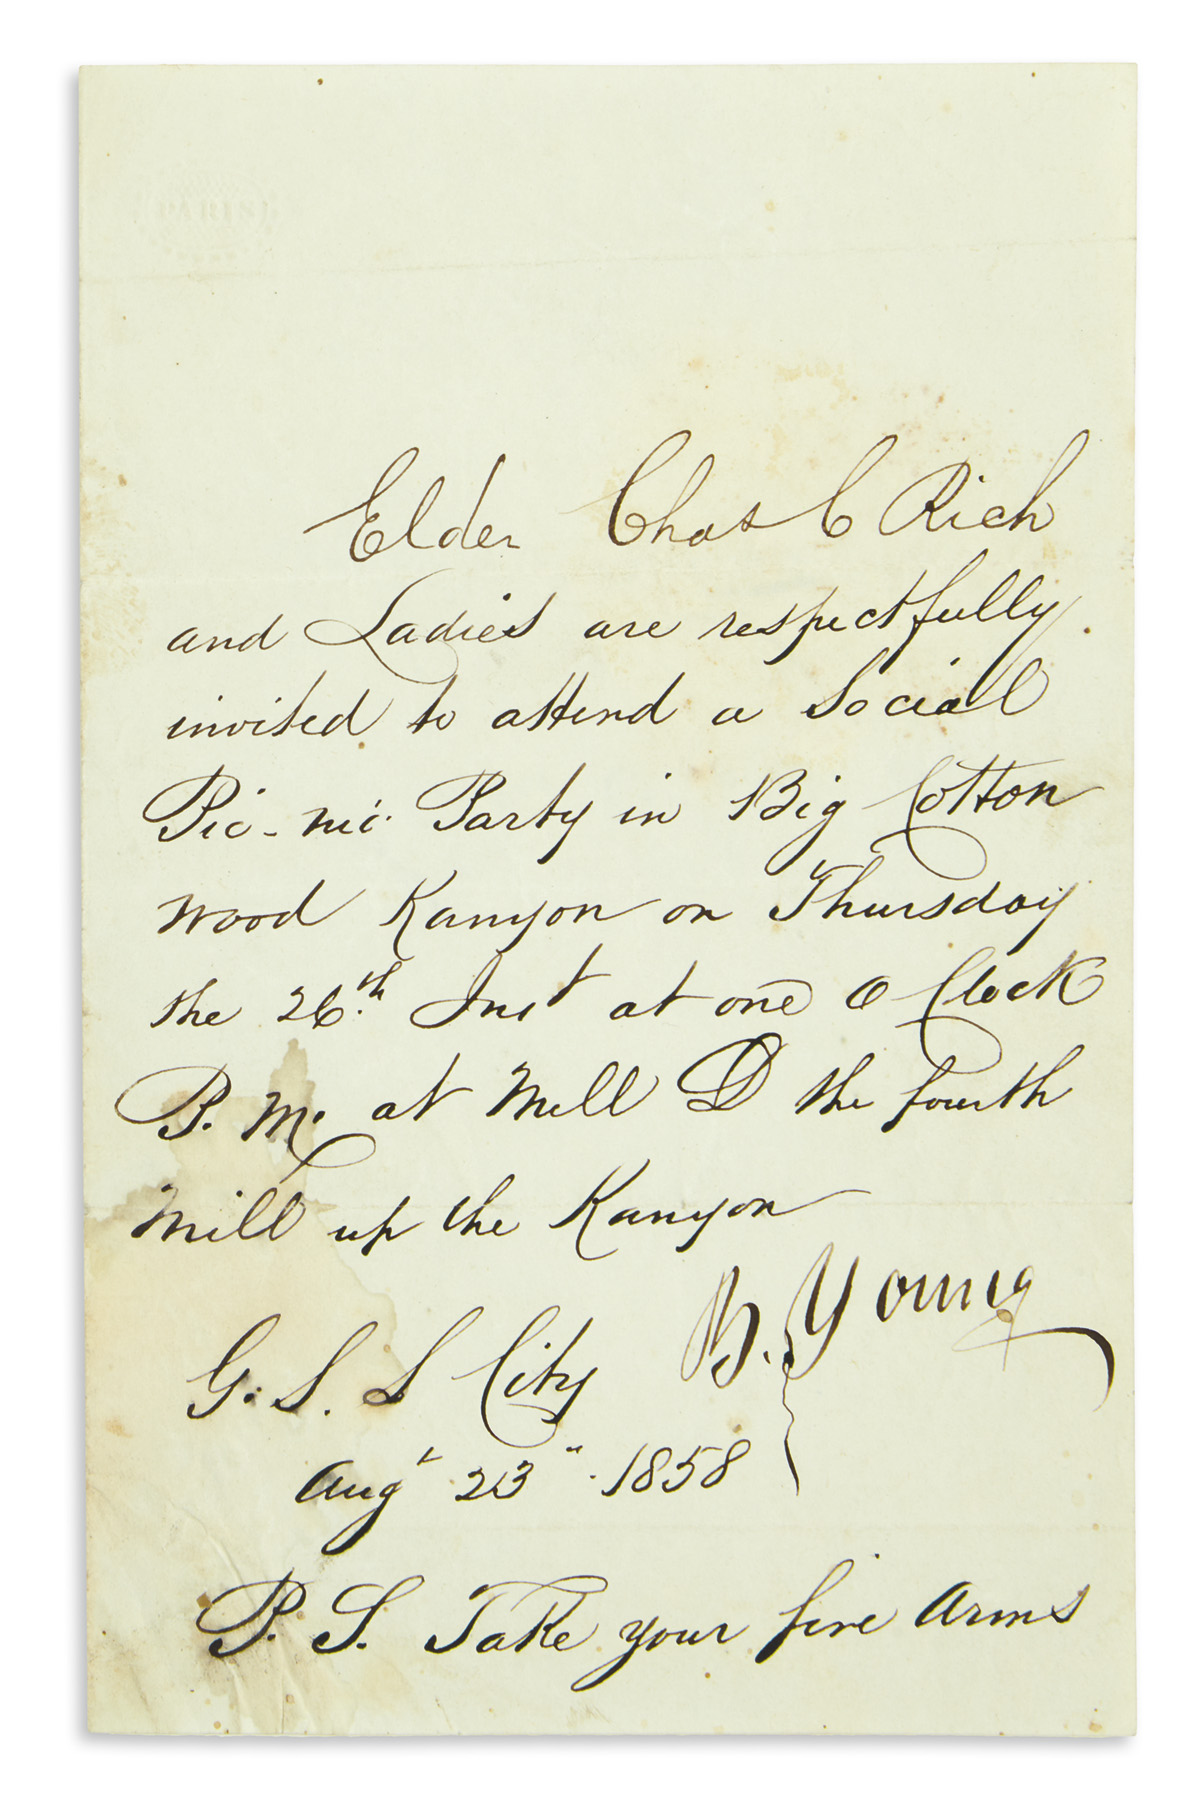 (MORMONS.) Young, Brigham. Invitation to a small post-Pioneer Day commemoration in the wake of the Utah War.